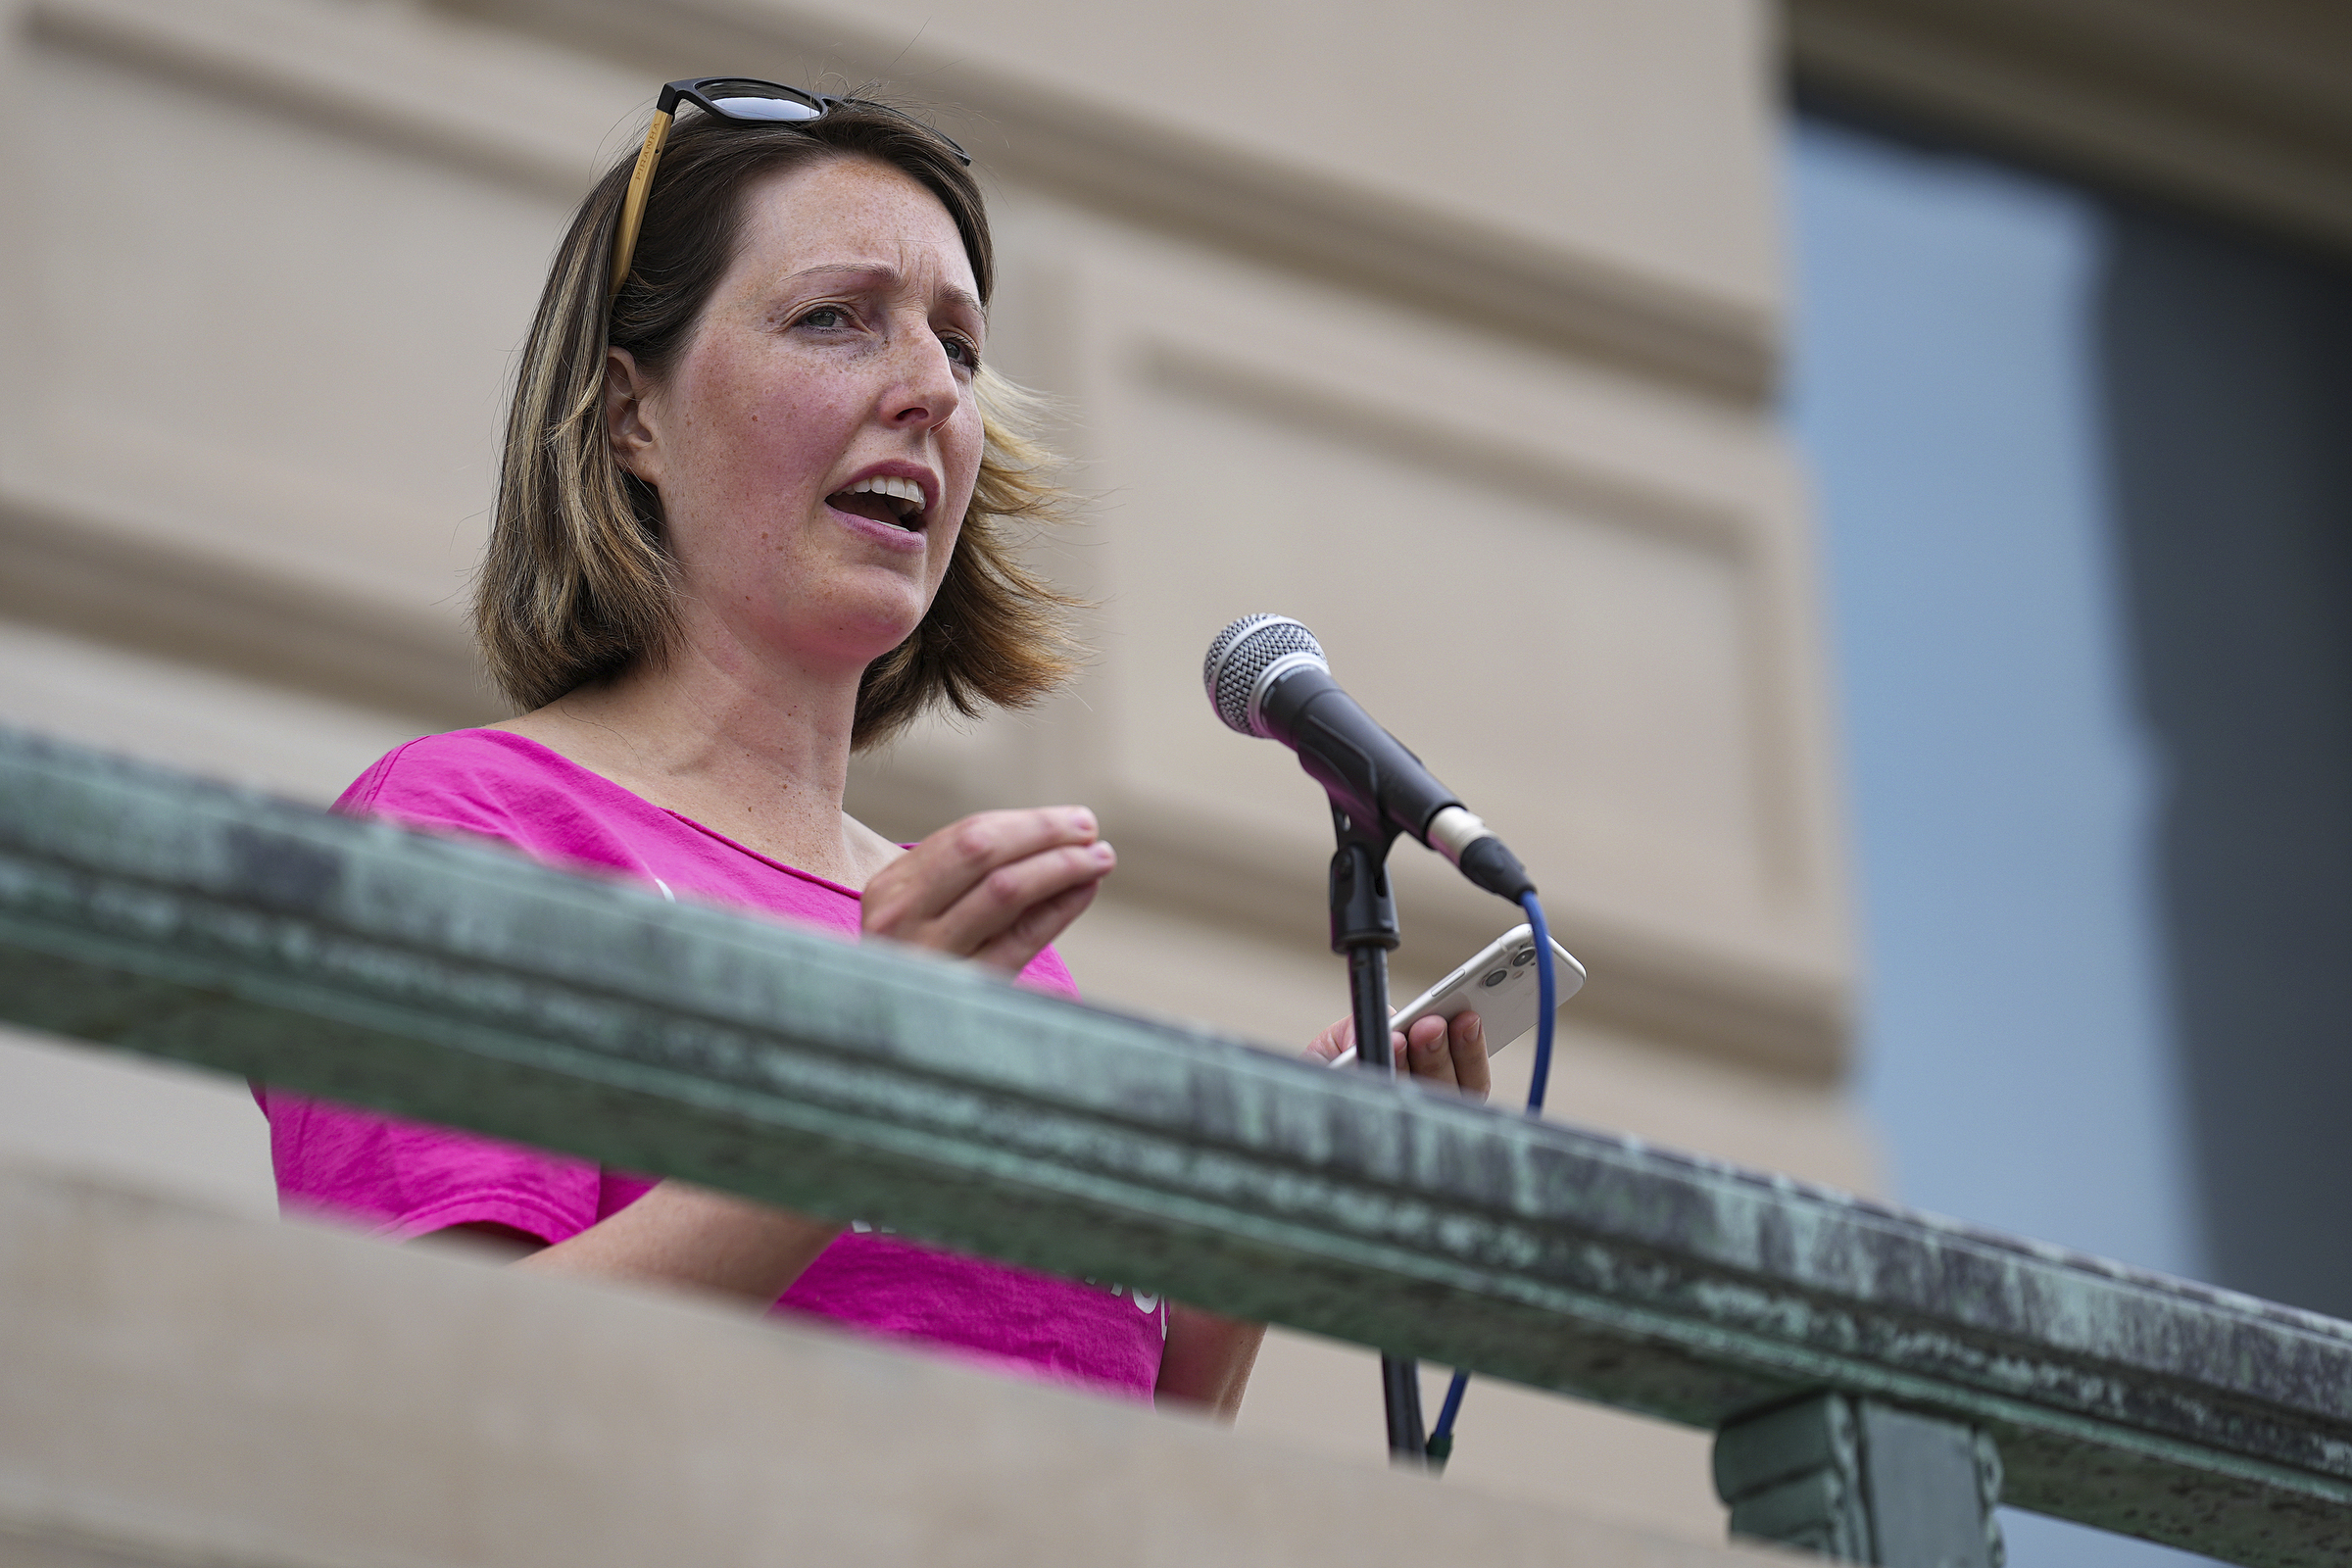 Dr. Caitlin Bernard, a reproductive healthcare provider, speaks during an abortion rights rally on Saturday, June 25, 2022, at the Indiana Statehouse in Indianapolis. (Jenna Watson–The Indianapolis Star/AP)